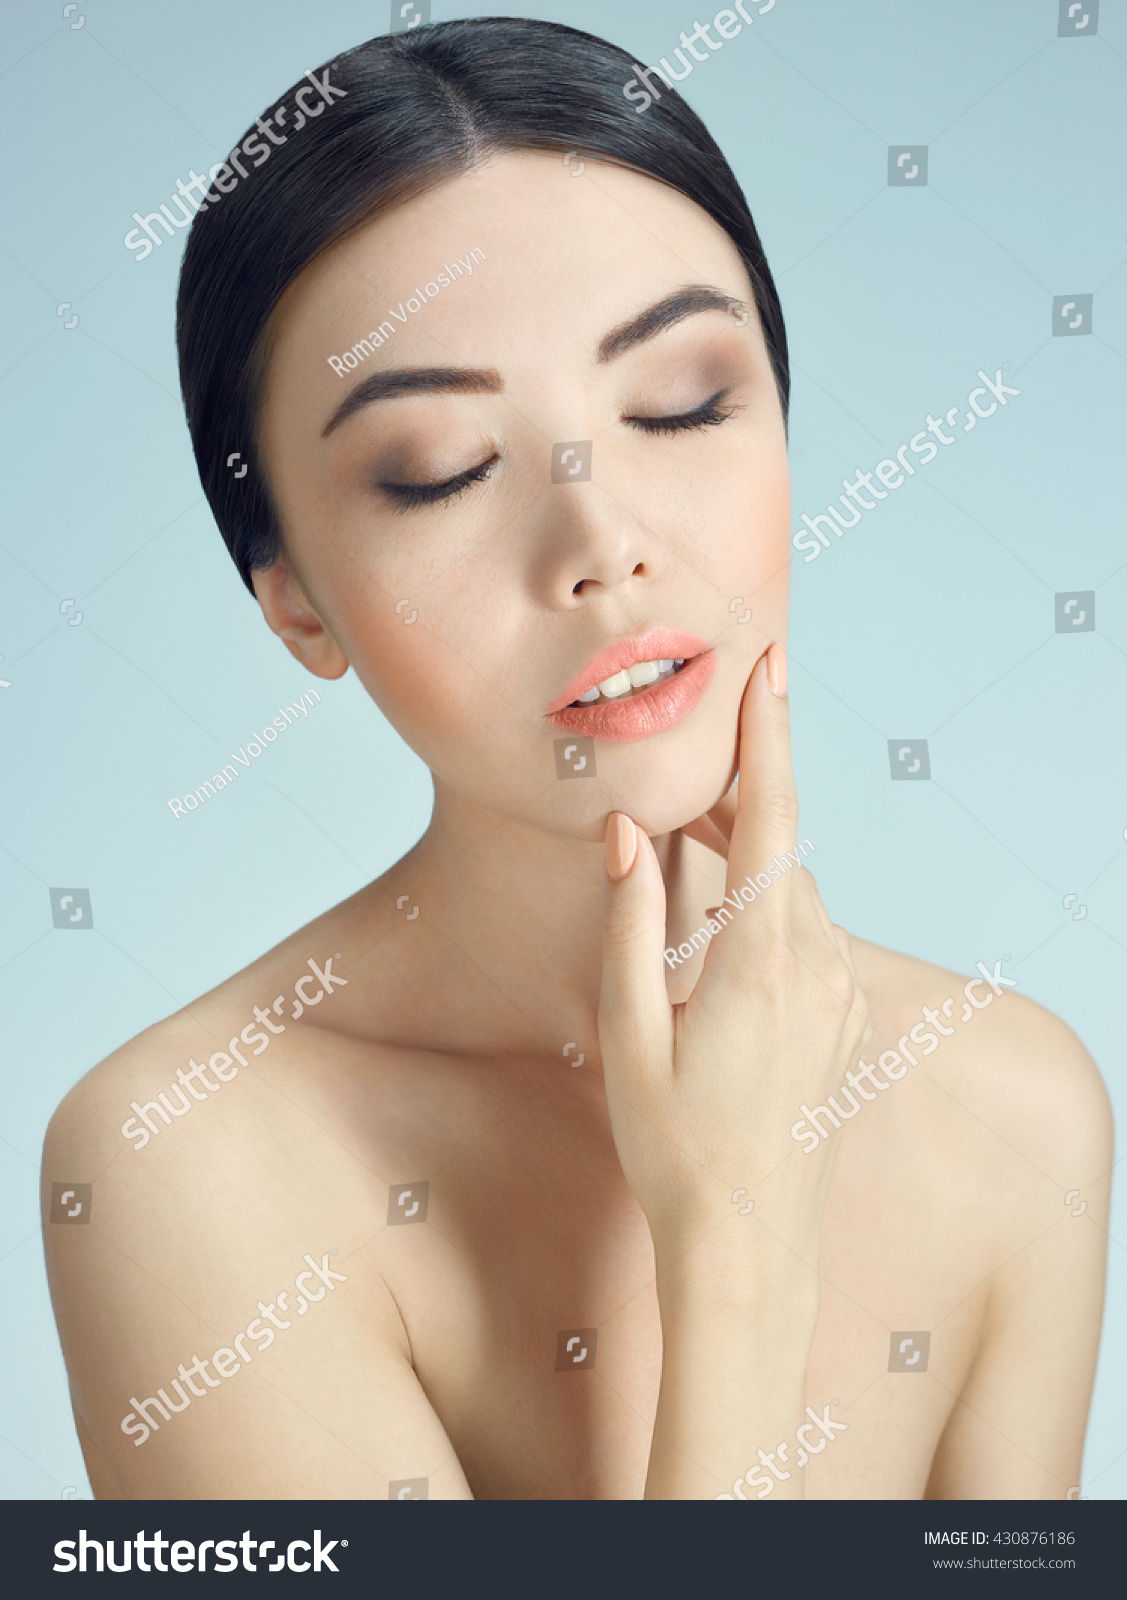 Portrait of a young girl Shooting beautiful young girl of Asian appearance #430876186